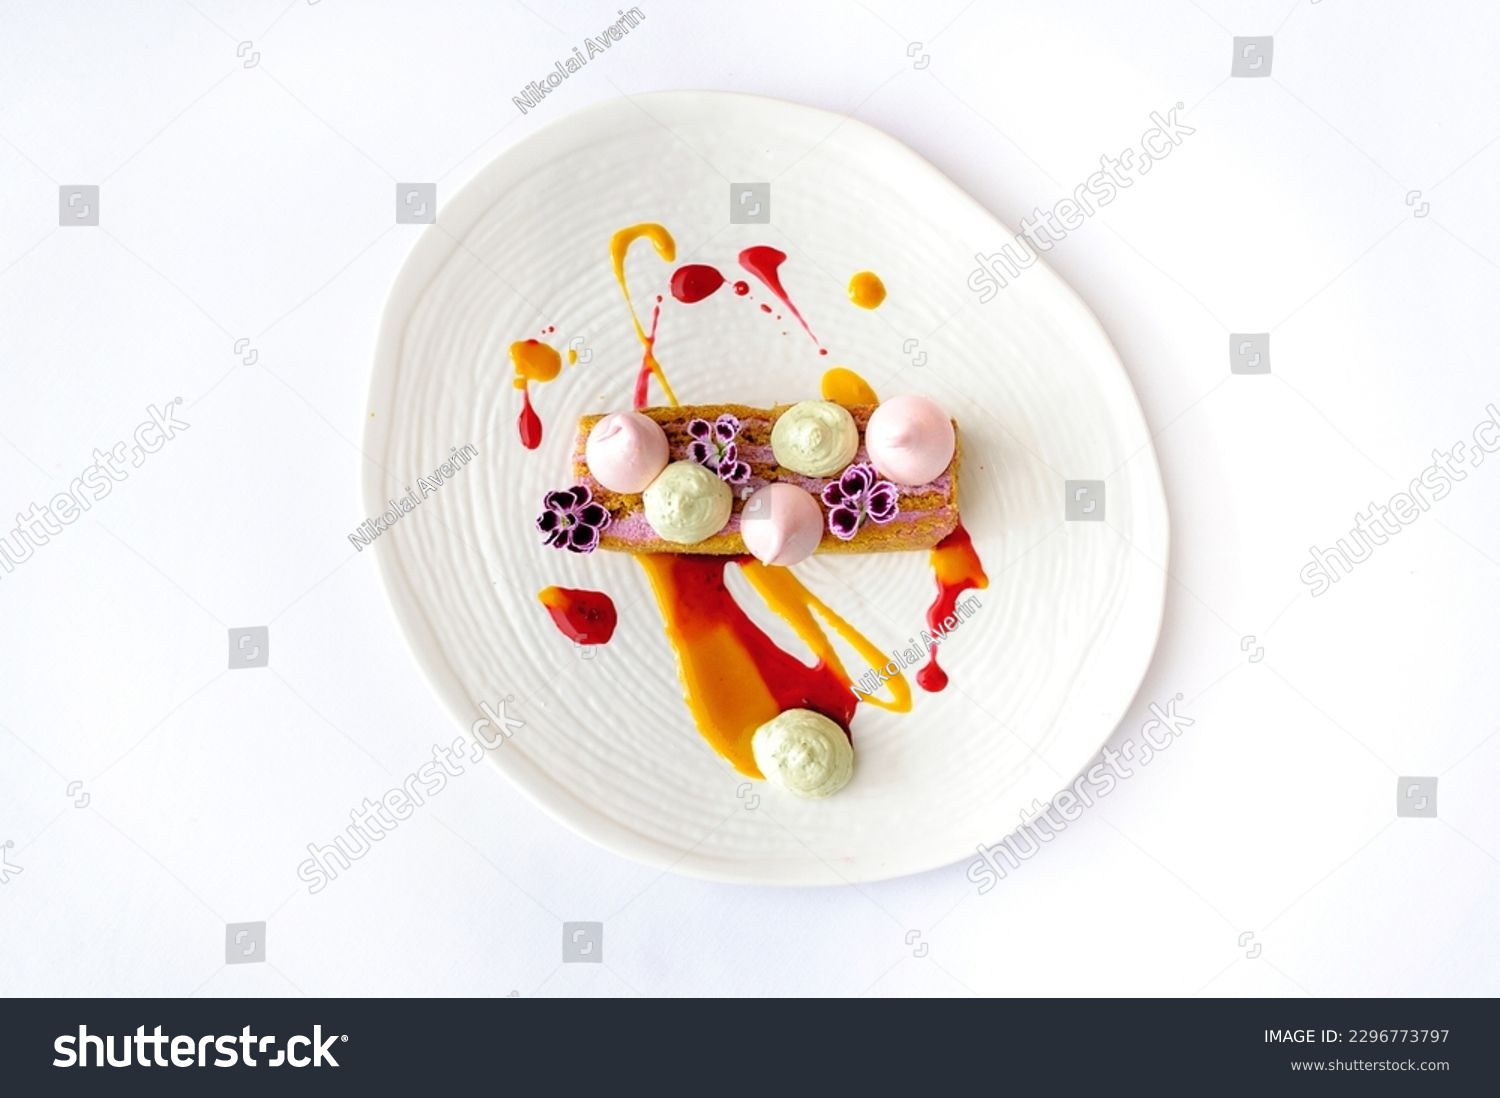 Carrot cake with berry mousse on a white plate isolated #2296773797